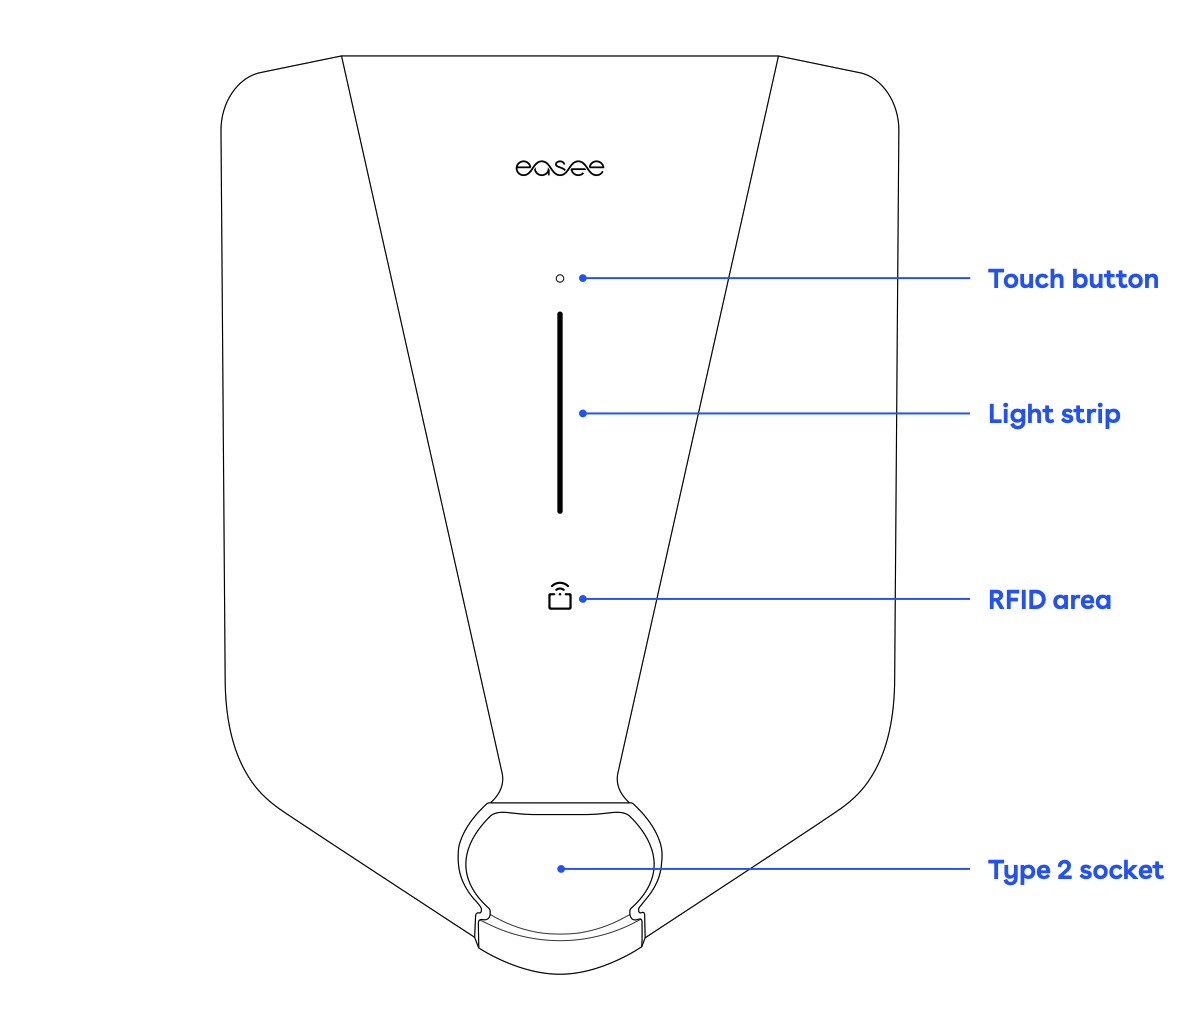 A wireframe illustration of an Easee charger. The touch button, RFID area, Light strip, and charging port are all called out with labels.